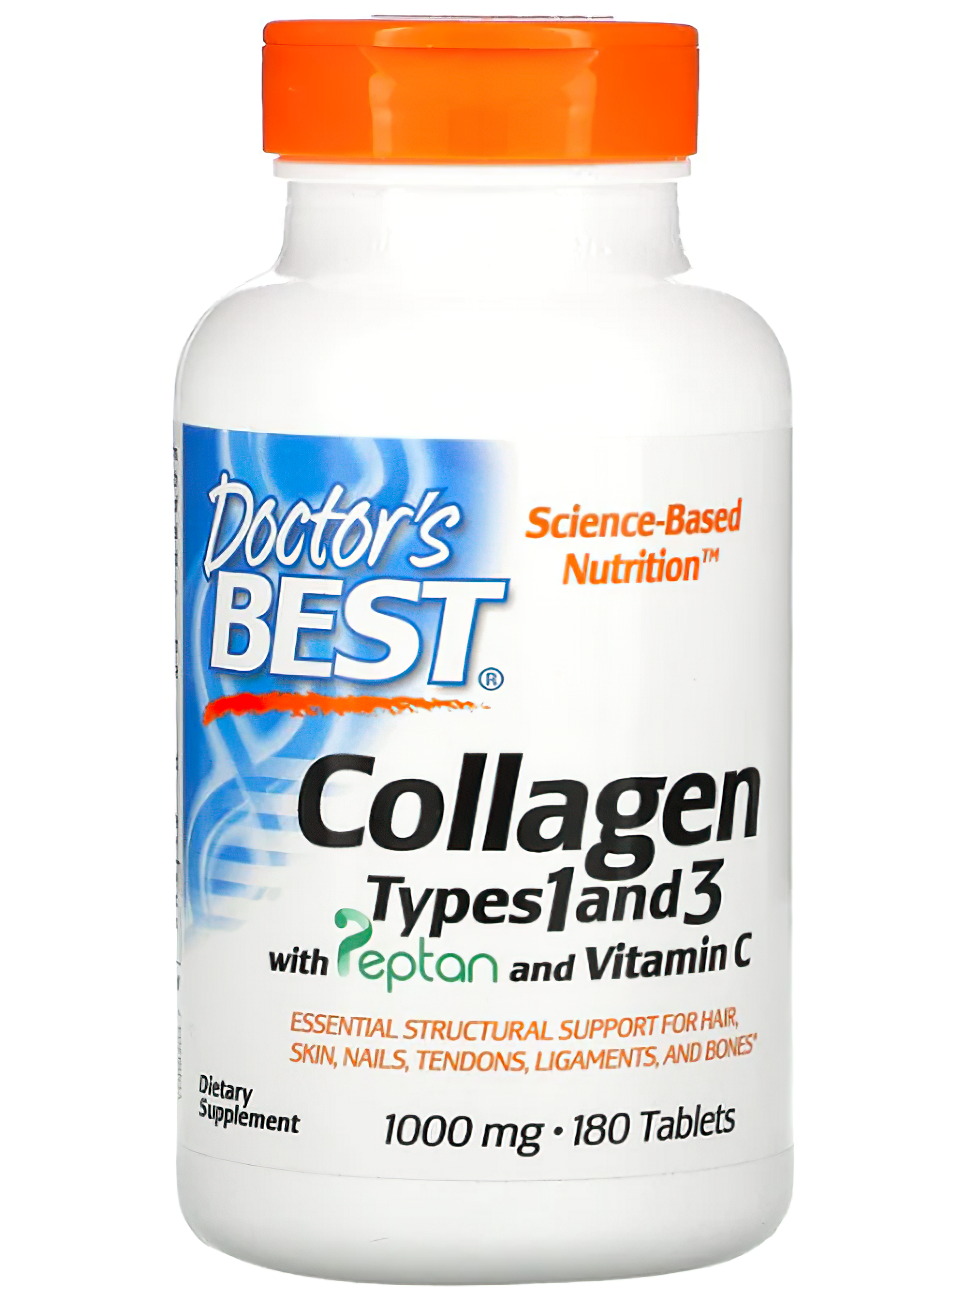 Doctor's Best Collagen Types 1 and 3 1000 mg 180 tablets with vitamin C.